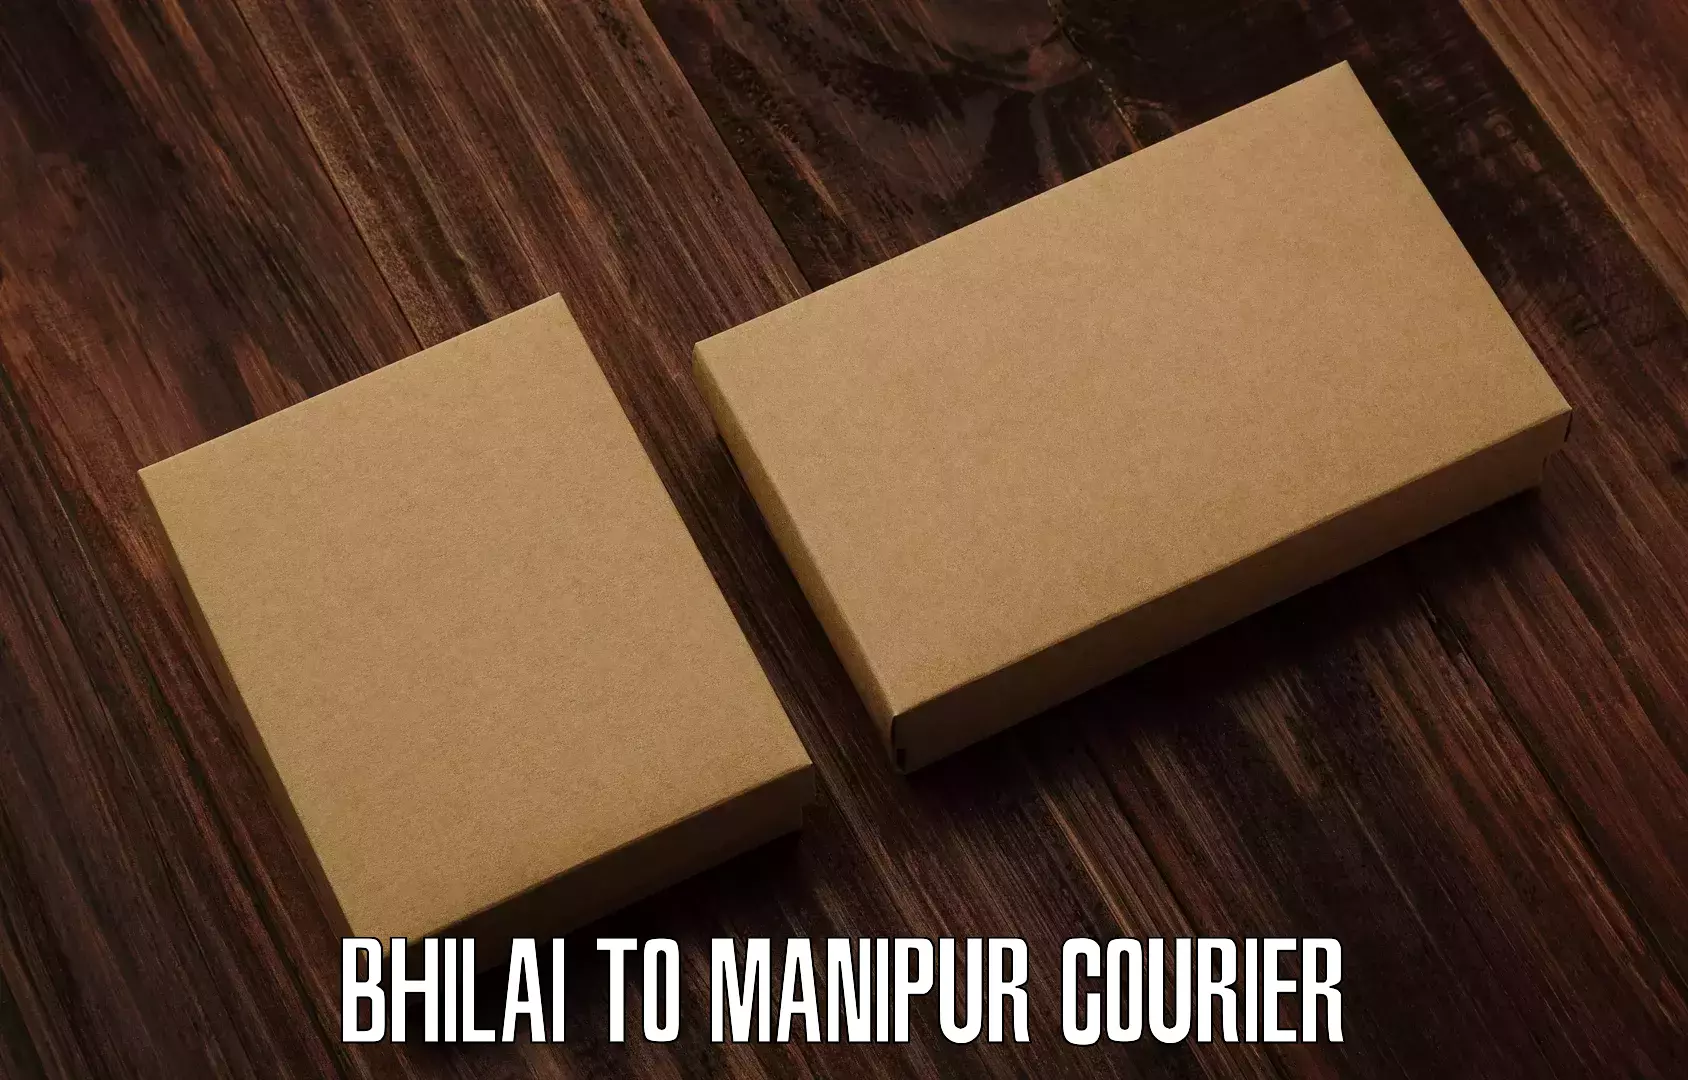 Subscription-based courier Bhilai to Manipur